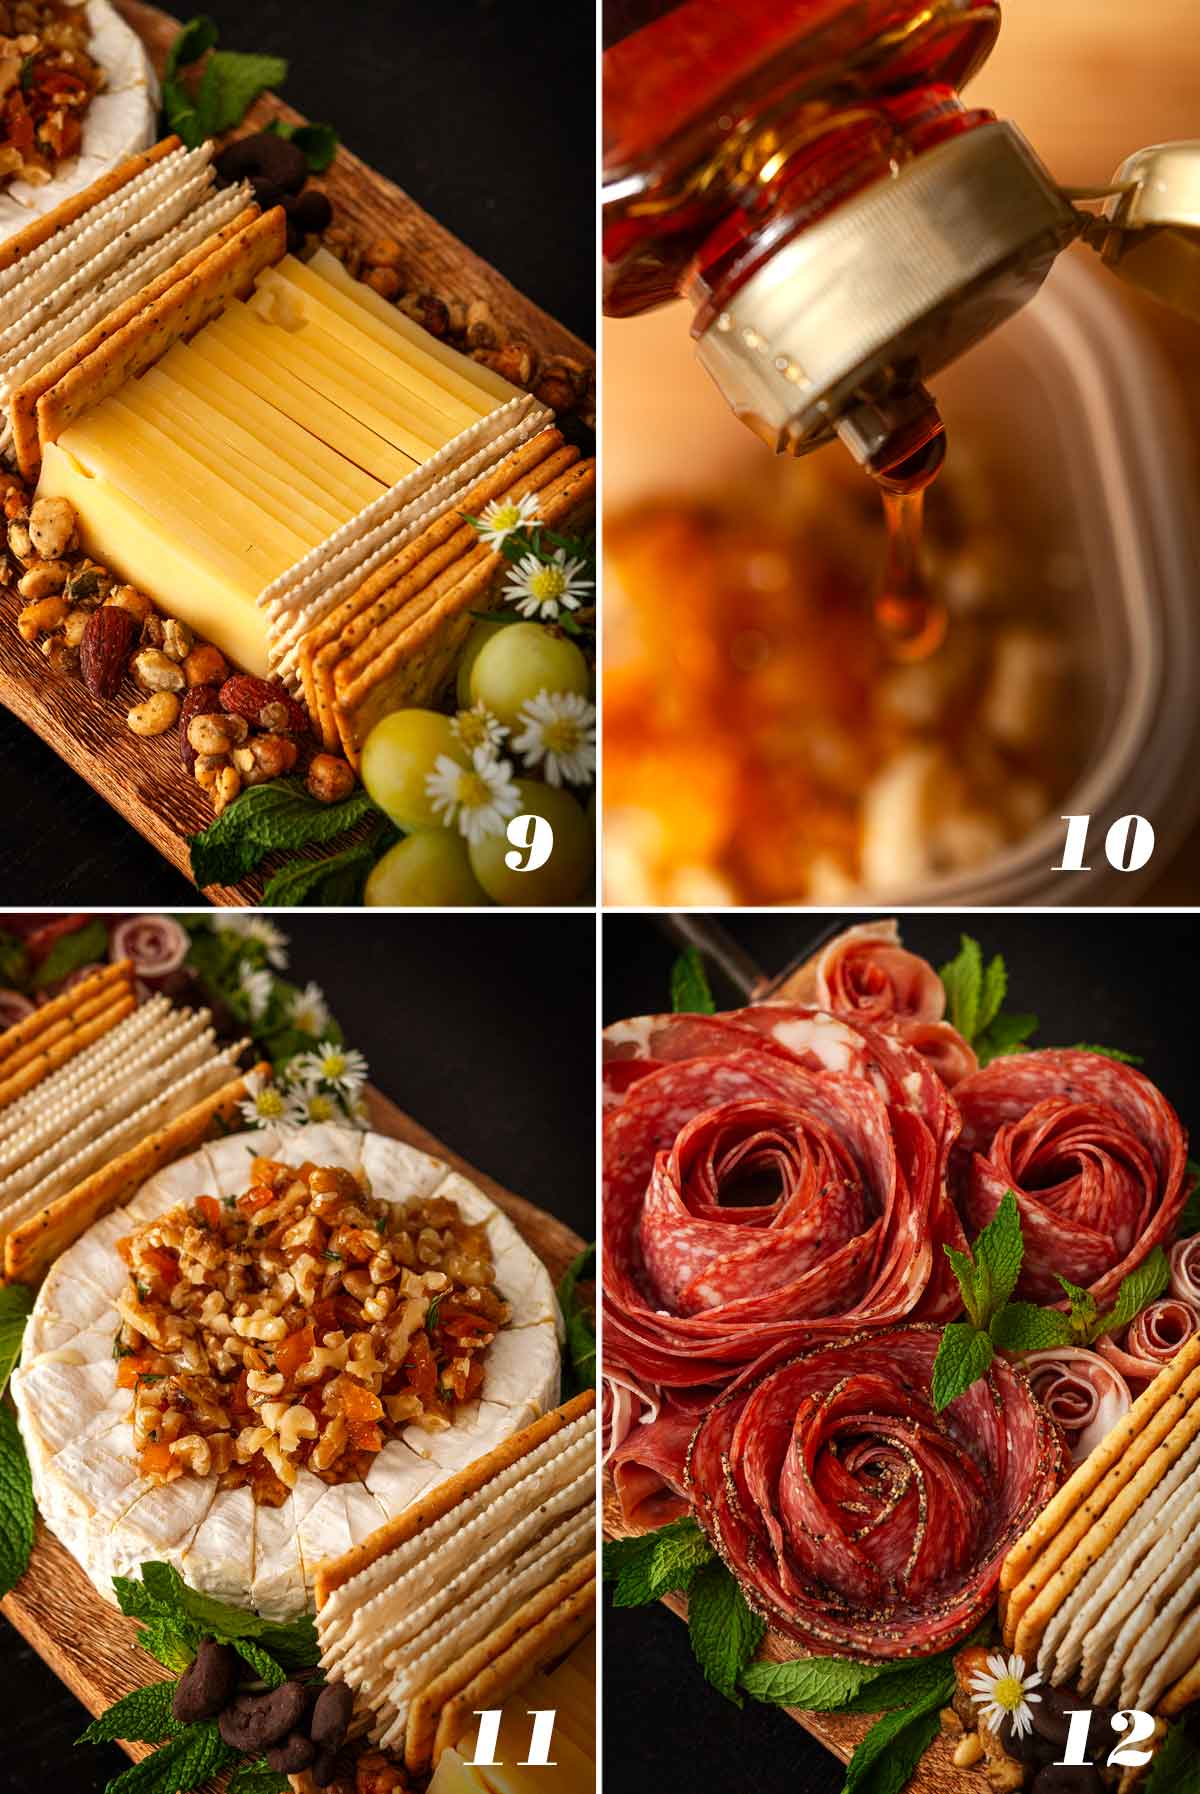 A collage of 4 numbered images showing how to add cheese and meat to a cheese board.